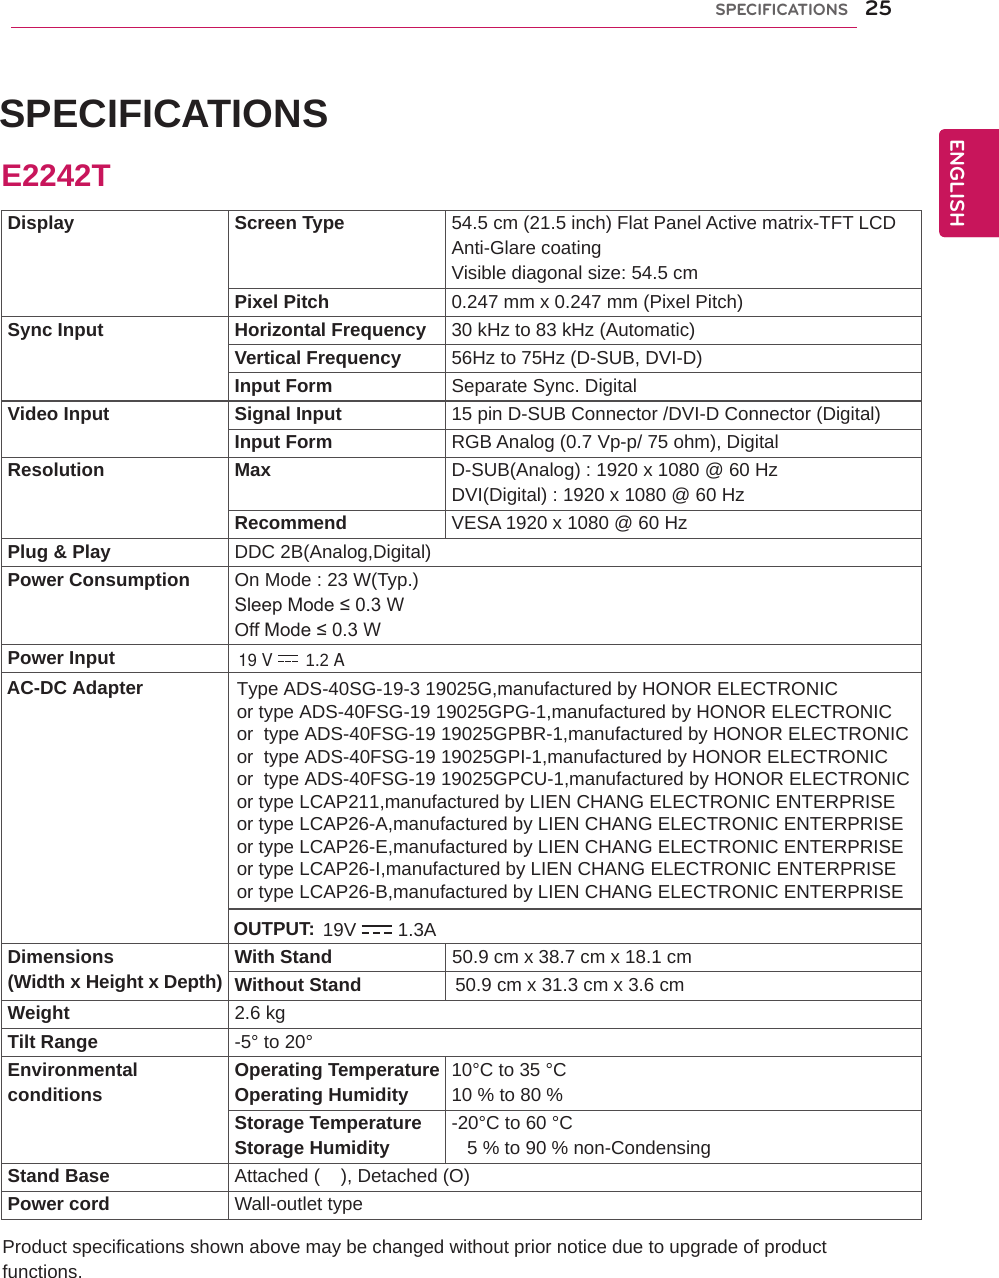 25ENGENGLISHSPECIFICATIONS SPECIFICATIONS Product specifications shown above may be changed without prior notice due to upgrade of product functions.Display Screen Type 54.5 cm (21.5 inch) Flat Panel Active matrix-TFT LCDAnti-Glare coatingVisible diagonal size: 54.5 cmPixel Pitch 0.247 mm x 0.247 mm (Pixel Pitch)Sync Input Horizontal Frequency 30 kHz to 83 kHz (Automatic)Vertical Frequency 56Hz to 75Hz (D-SUB, DVI-D)Input Form Separate Sync. DigitalVideo Input Signal Input 15 pin D-SUB Connector /DVI-D Connector (Digital)Input Form RGB Analog (0.7 Vp-p/ 75 ohm), DigitalResolution Max D-SUB(Analog) : 1920 x 1080 @ 60 HzDVI(Digital) : 1920 x 1080 @ 60 HzRecommend VESA 1920 x 1080 @ 60 HzPlug &amp; Play DDC 2B(Analog,Digital)Power Consumption On Mode : 23 W(Typ.)Sleep Mode ≤ 0.3 W Off Mode ≤ 0.3 W Power InputDimensions(Width x Height x Depth) With Stand                       50.9 cm x 38.7 cm x 18.1 cmWithout Stand                  50.9 cm x 31.3 cm x 3.6 cmWeight 2.6 kgTilt Range -5° to 20°Environmentalconditions Operating TemperatureOperating Humidity 10°C to 35 °C10 % to 80 % Storage TemperatureStorage Humidity -20°C to 60 °C   5 % to 90 % non-CondensingStand Base Attached (    ), Detached (O)Power cord Wall-outlet typeE2242T19 V 1.2 A AC-DC Adapter Type ADS-40SG-19-3 19025G,manufactured by HONOR ELECTRONICor type ADS-40FSG-19 19025GPG-1,manufactured by HONOR ELECTRONICor  type ADS-40FSG-19 19025GPBR-1,manufactured by HONOR ELECTRONICor  type ADS-40FSG-19 19025GPI-1,manufactured by HONOR ELECTRONICor  type ADS-40FSG-19 19025GPCU-1,manufactured by HONOR ELECTRONICor type LCAP211,manufactured by LIEN CHANG ELECTRONIC ENTERPRISEor type LCAP26-A,manufactured by LIEN CHANG ELECTRONIC ENTERPRISEor type LCAP26-E,manufactured by LIEN CHANG ELECTRONIC ENTERPRISEor type LCAP26-I,manufactured by LIEN CHANG ELECTRONIC ENTERPRISEor type LCAP26-B,manufactured by LIEN CHANG ELECTRONIC ENTERPRISE OUTPUT: 19V 1.3A